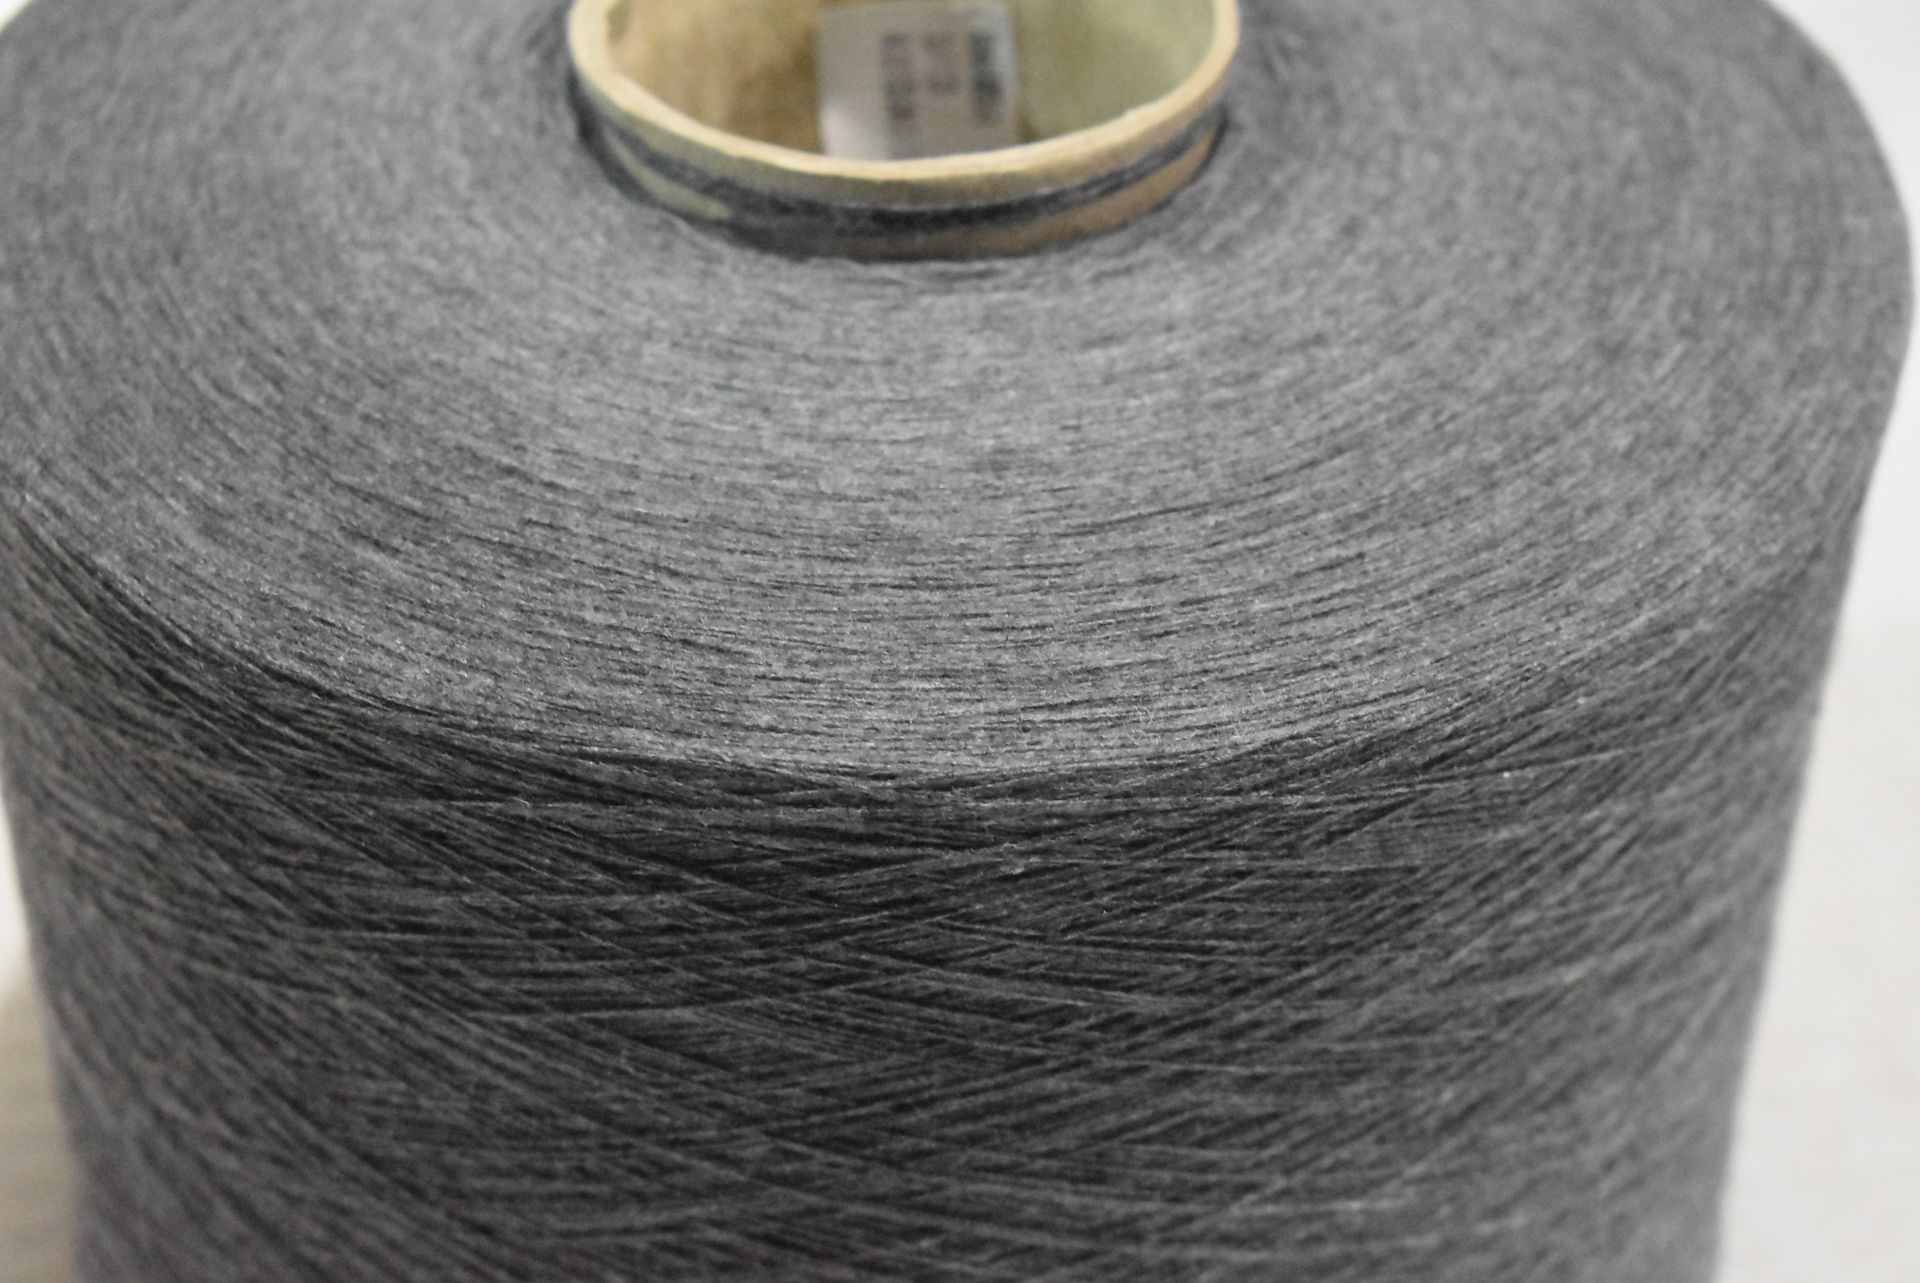 18 x Cones of 1/13 MicroCotton Knitting Yarn - Mid Grey - Approx Weight: 2,500g - New Stock ABL Yarn - Image 6 of 16